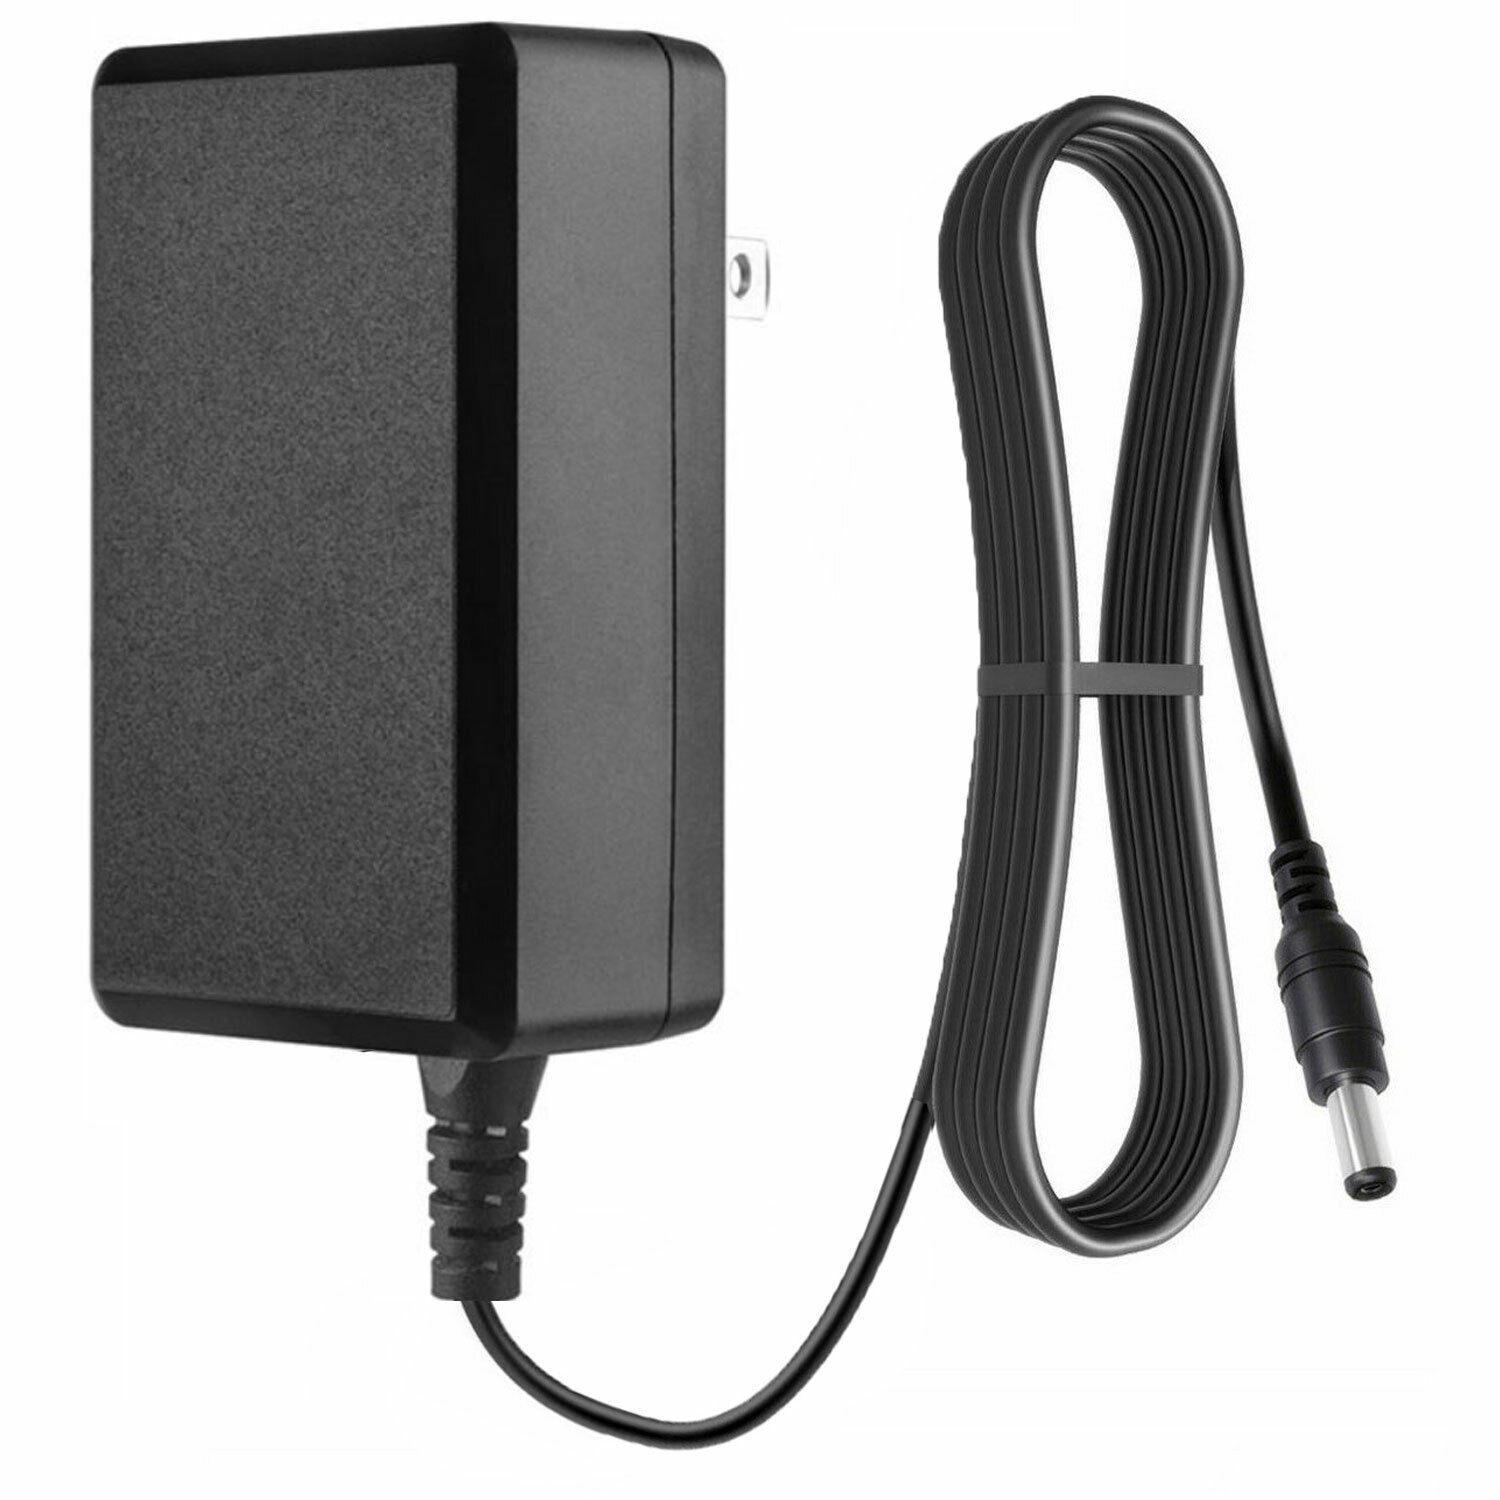 15V Ac/Dc Adapter Compatible With Devcon Power P/N 860Dsp-Acc Trilithic 860Dsp 860Dspi 860 Dsp 860 Dspi Catv Dsam Cable